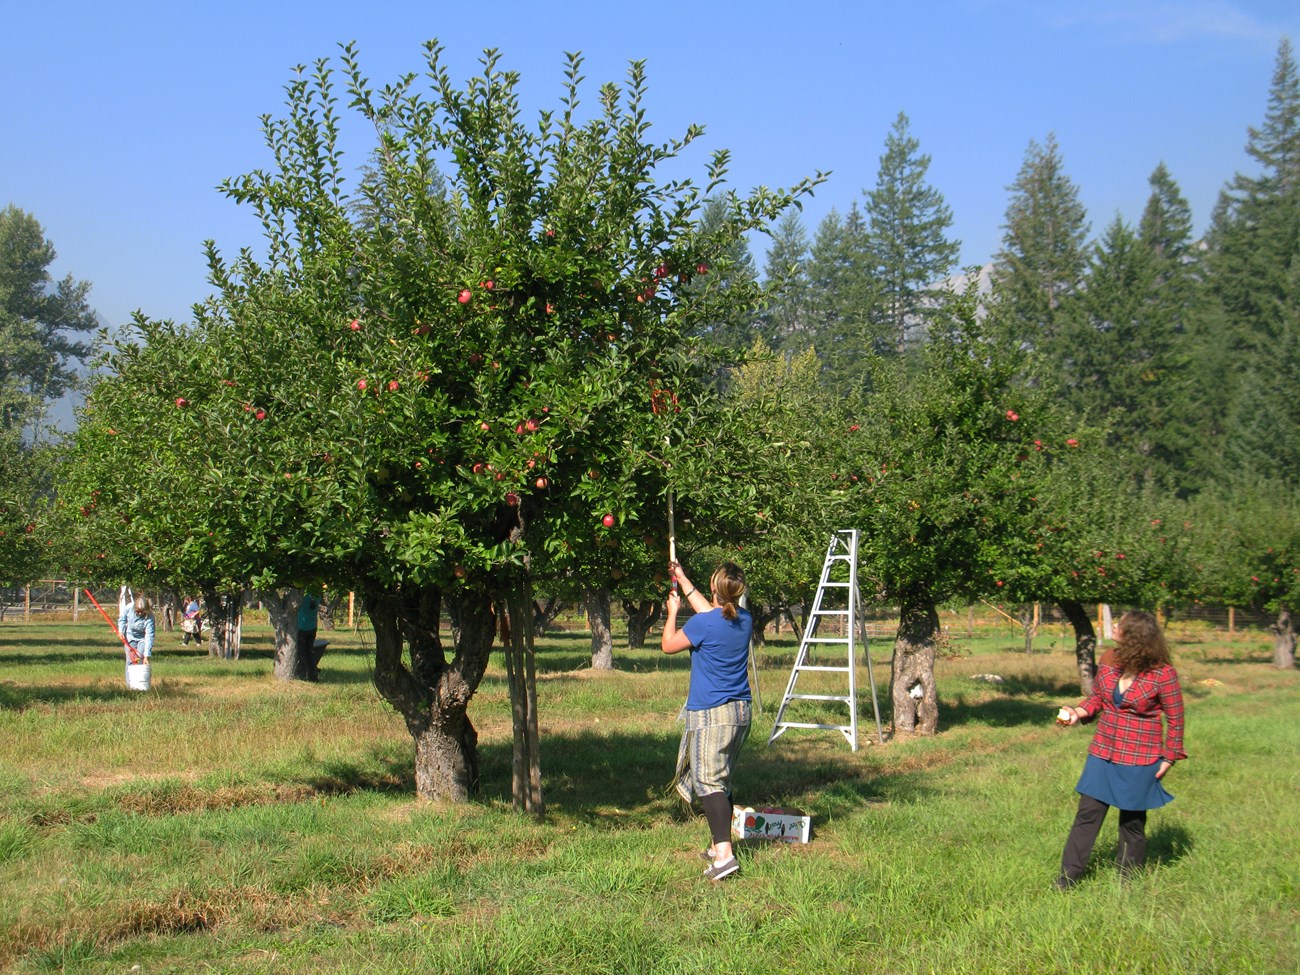 Two people use a picker to reach up into the dense, leafy branches of a tree to pick apples